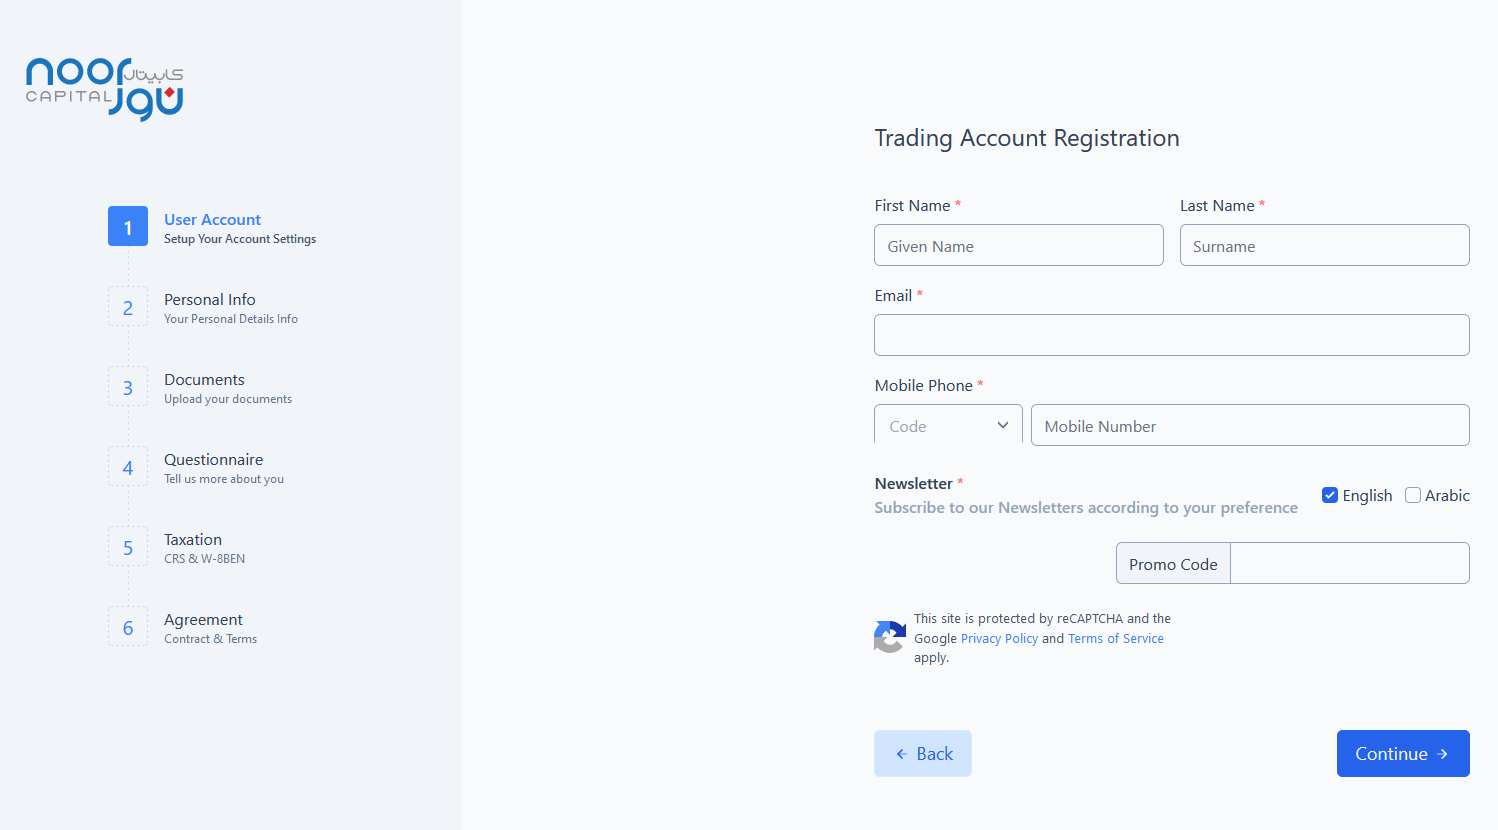 Review of Noor Capital’s User Account — Open a trading account